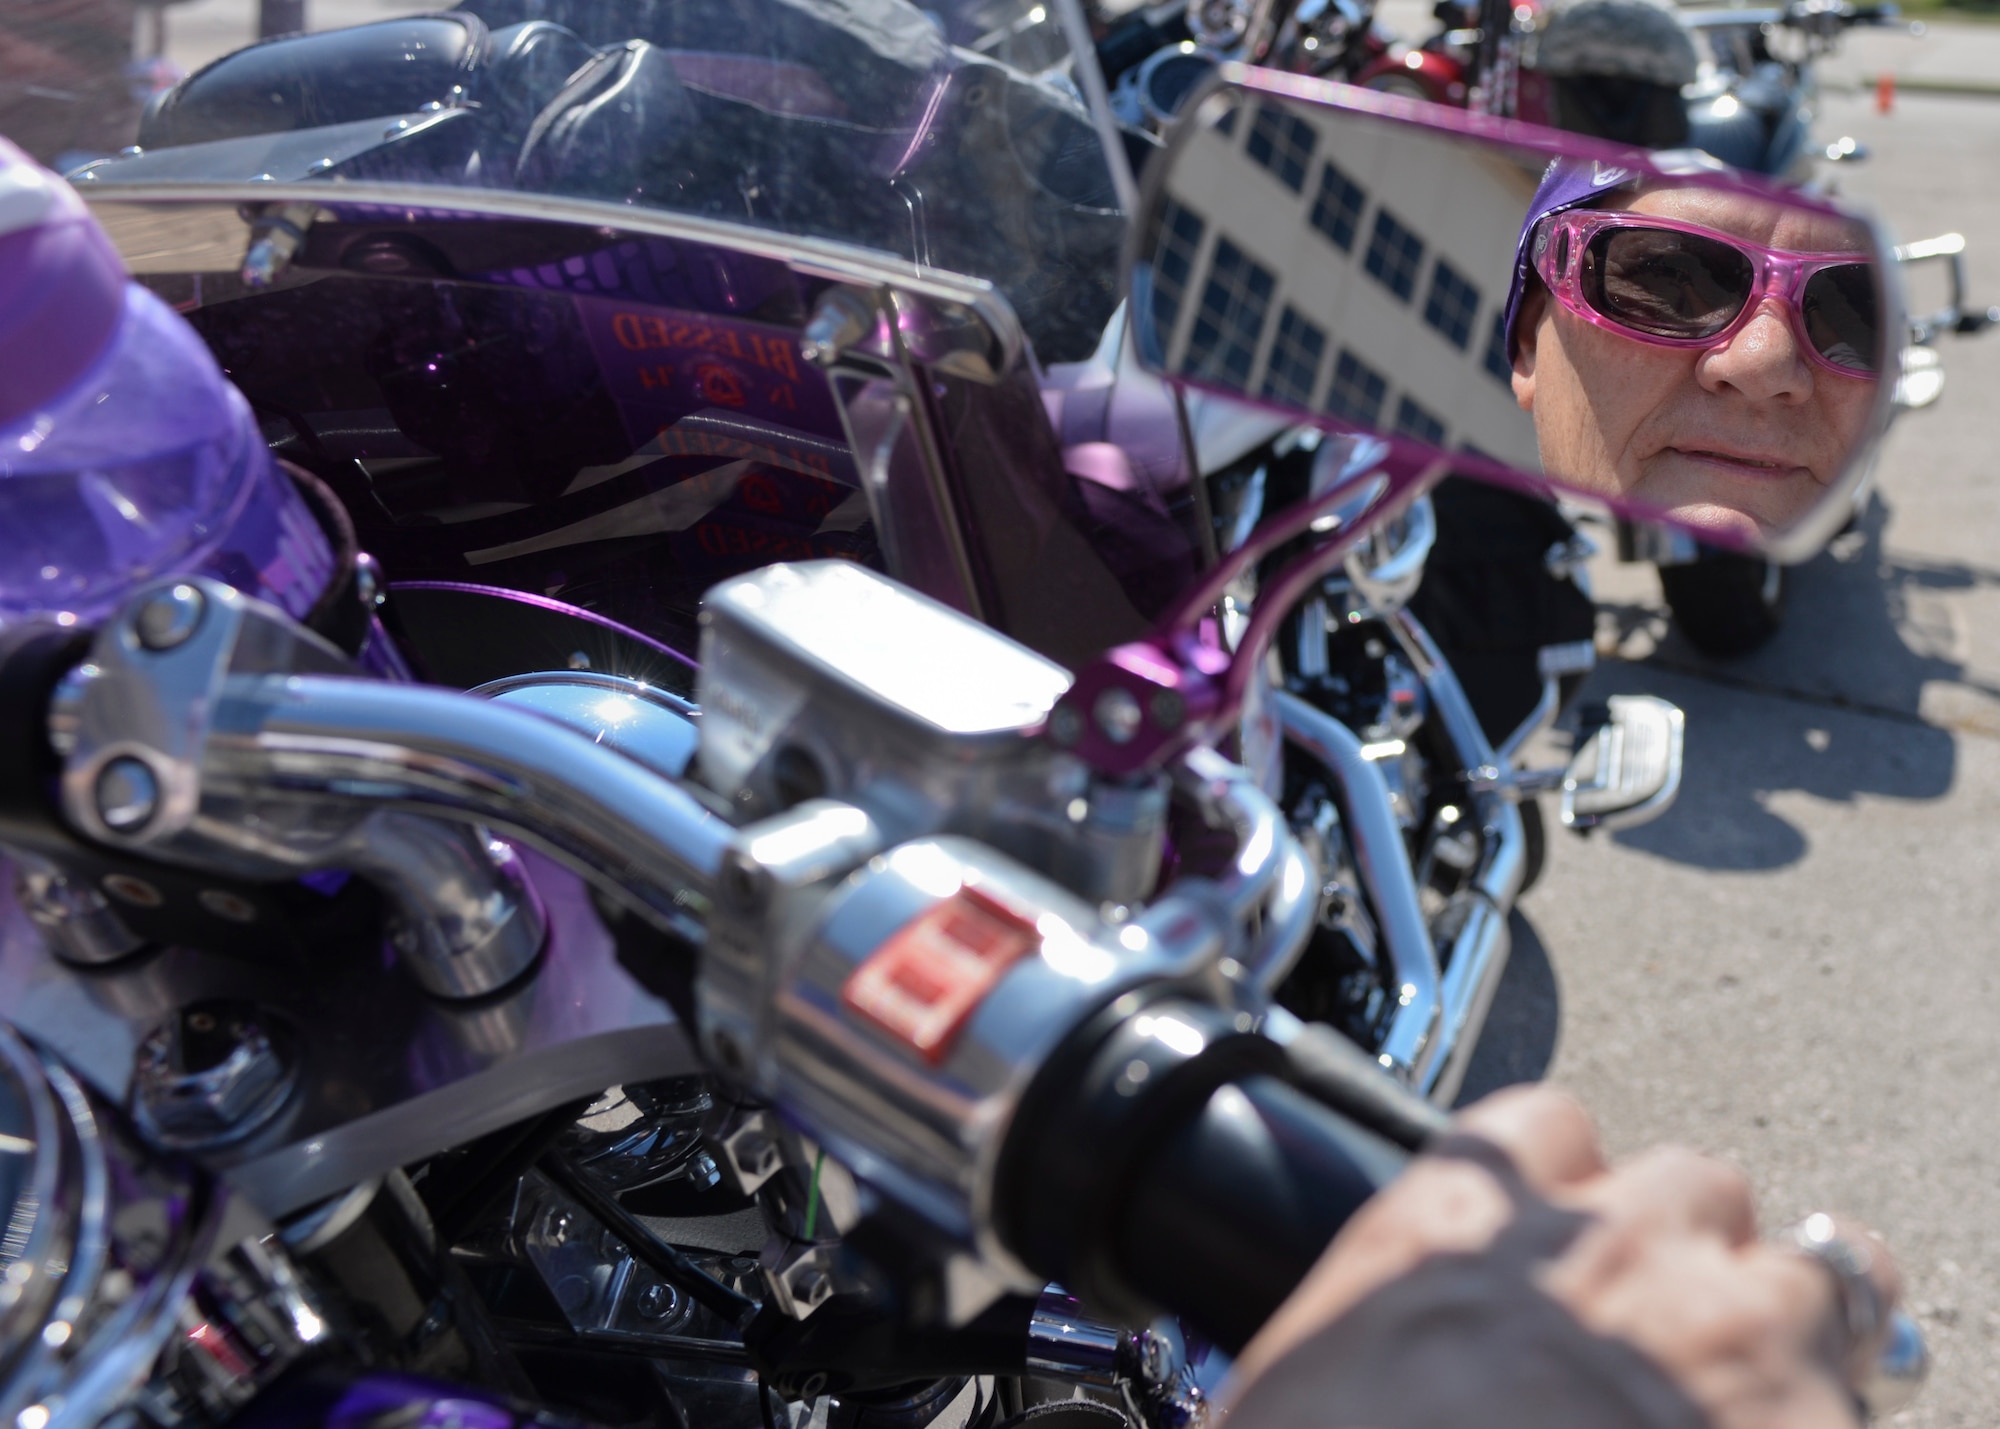 Pam Gunderson, motorcycle enthusiast from Rapid City, S.D., prepares her motorcycle prior to the start of the 16th Annual Dakota Thunder Run on the flight line at Ellsworth Air Force Base, S.D., Aug. 9, 2016. Gunderson, along with her two sisters, has participated in the ride for six consecutive years and enjoys that the military can be appreciated in such a fun way. (U.S. Air Force photo by Senior Airman Anania Tekurio/Released)